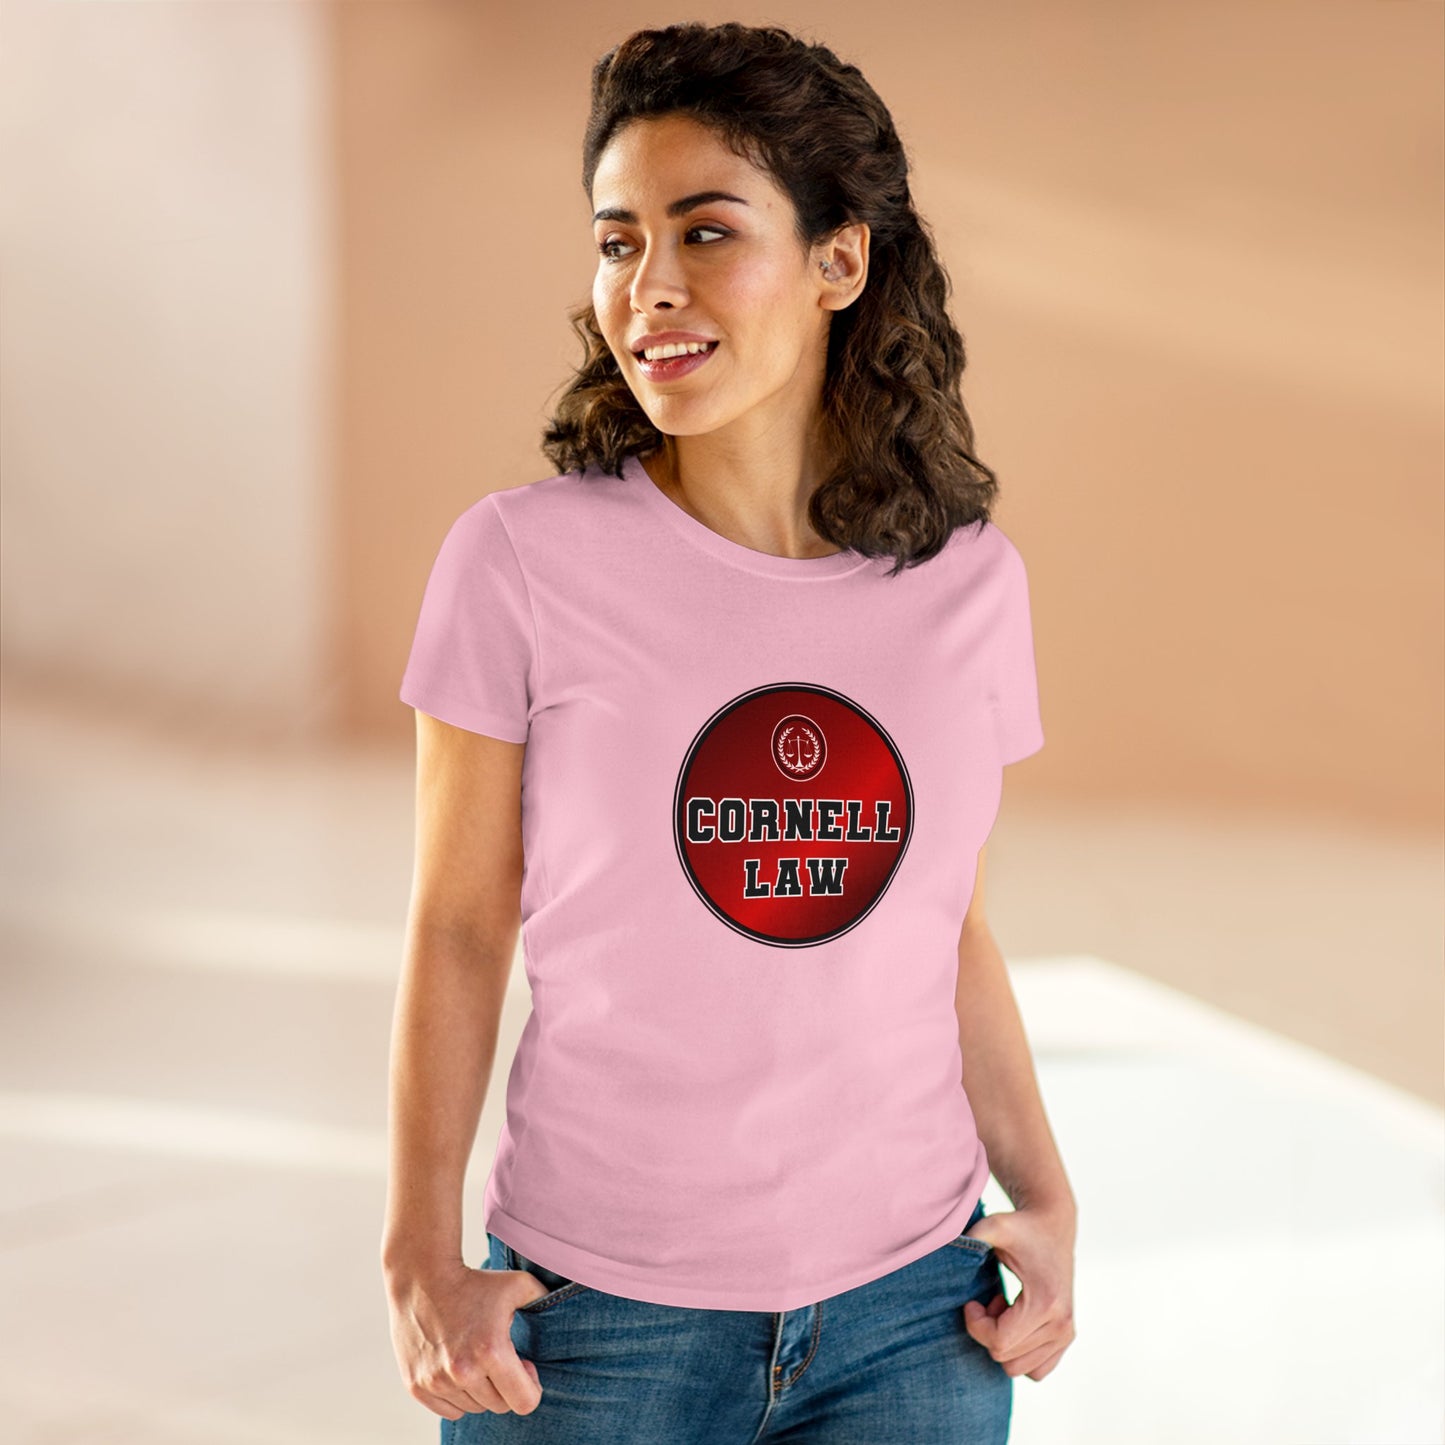 Cornell University Law School, Scales of Justice- Adult, Semi-fitted, Smaller Size Image, T-shirt